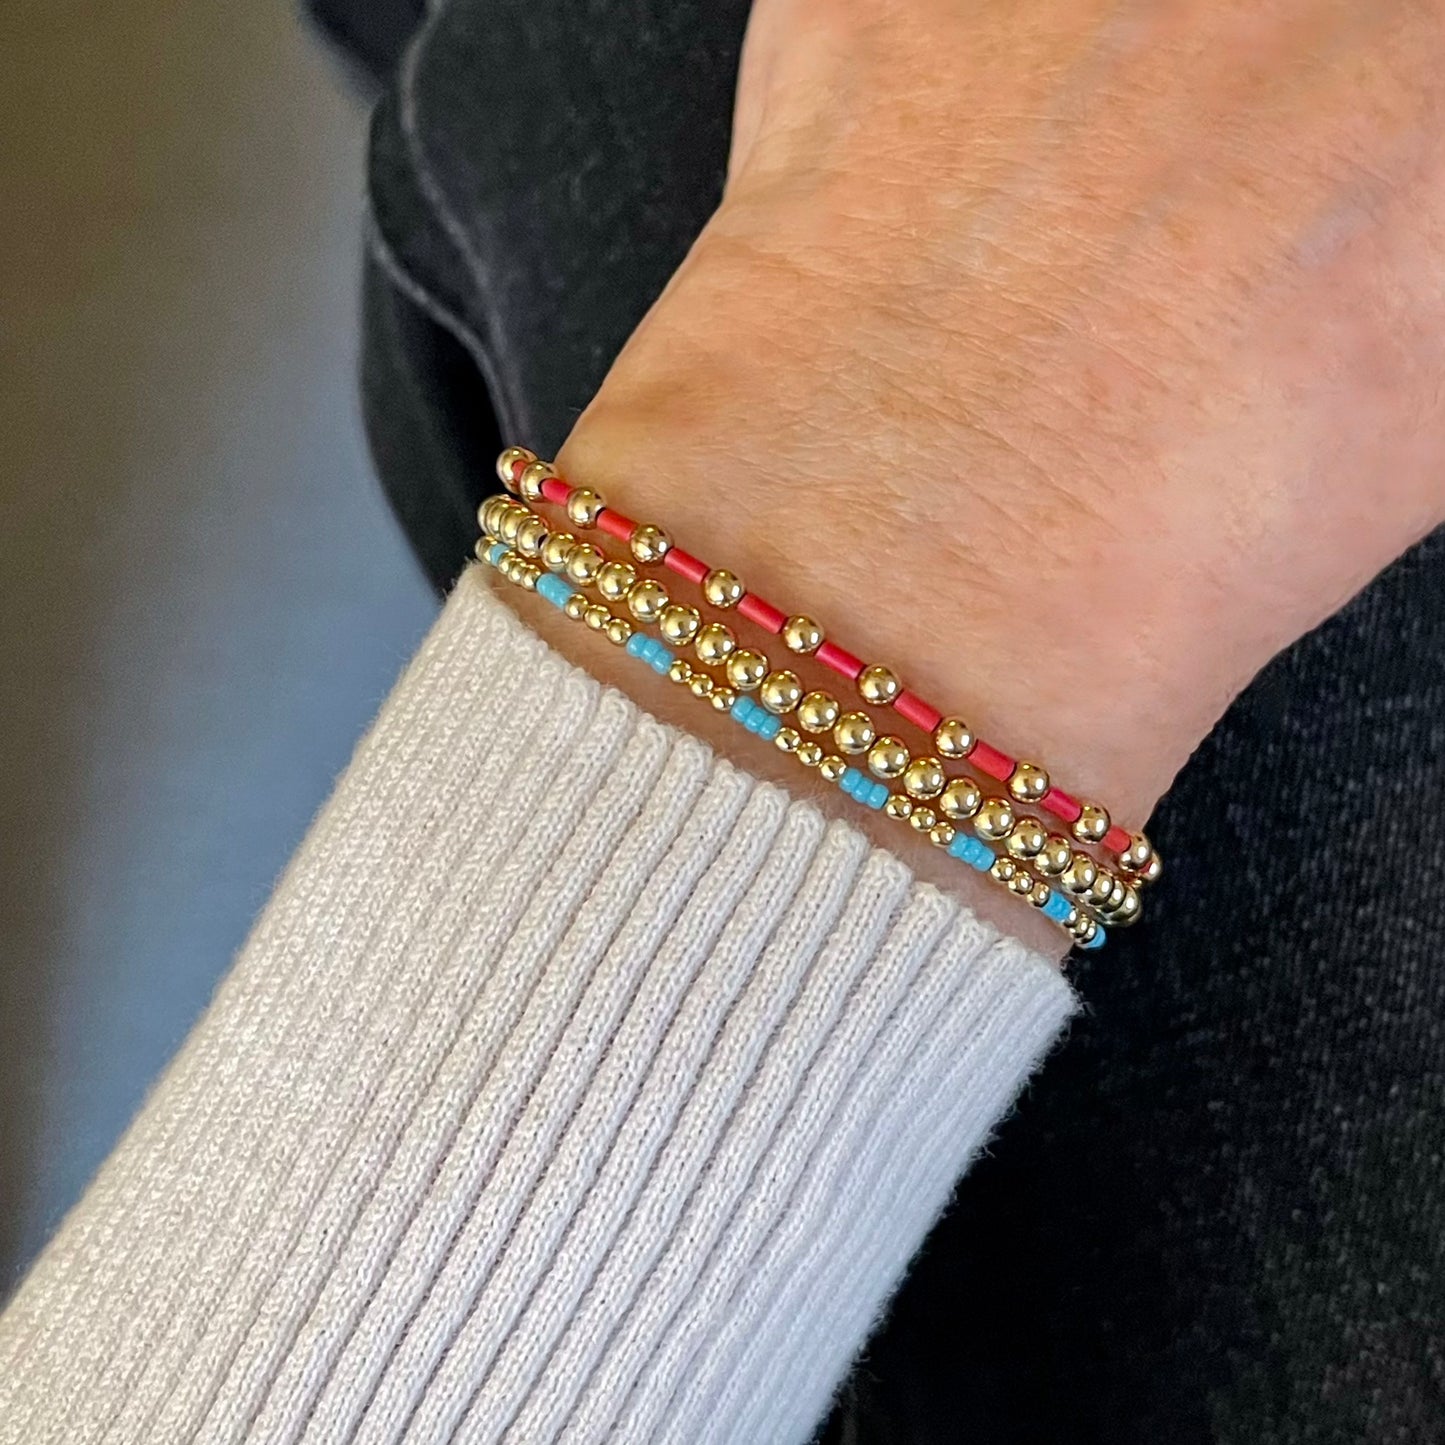 Bead bracelets with 14K gold filled beads and red and light blue seed beads. Dainty stretch bracelet stack of 3.